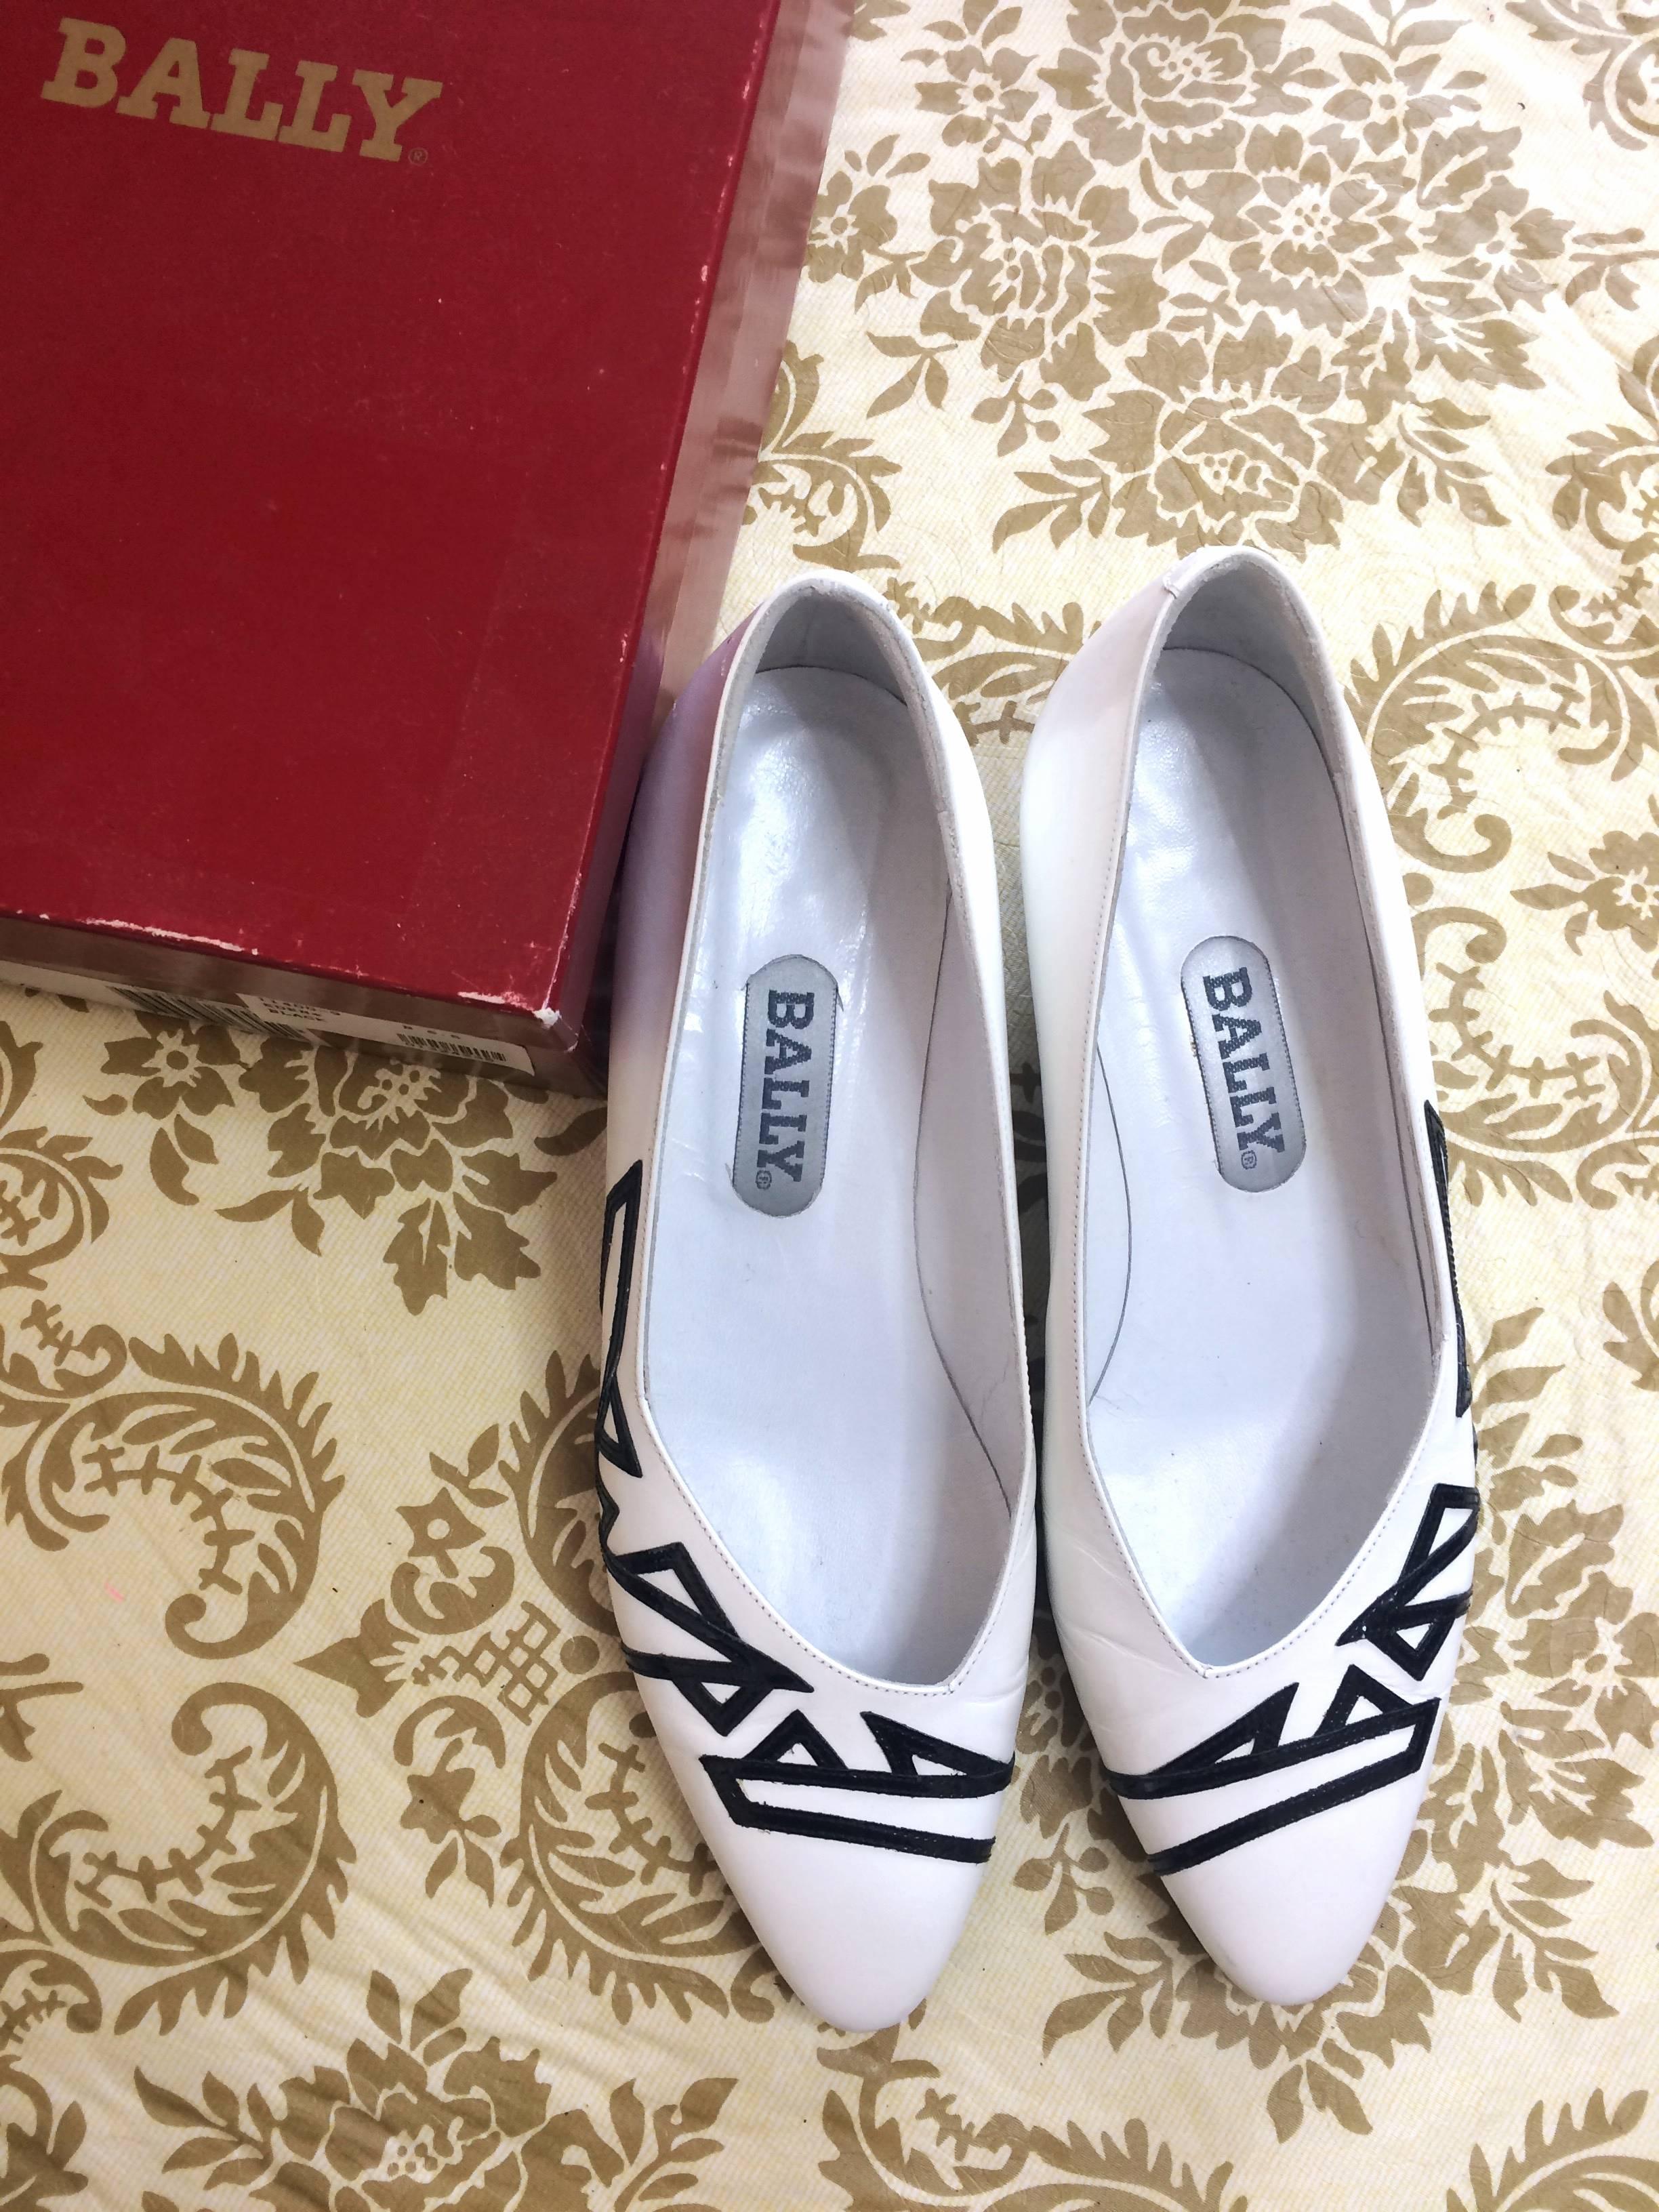 Vintage BALLY white and black leather flat shoes, pumps with geometric design.  US6.5 Made in Italy.

This is a vintage pair of shoes in white and black leather from Bally.
Featuring black geometric motifs as an accent on white.
Showing some